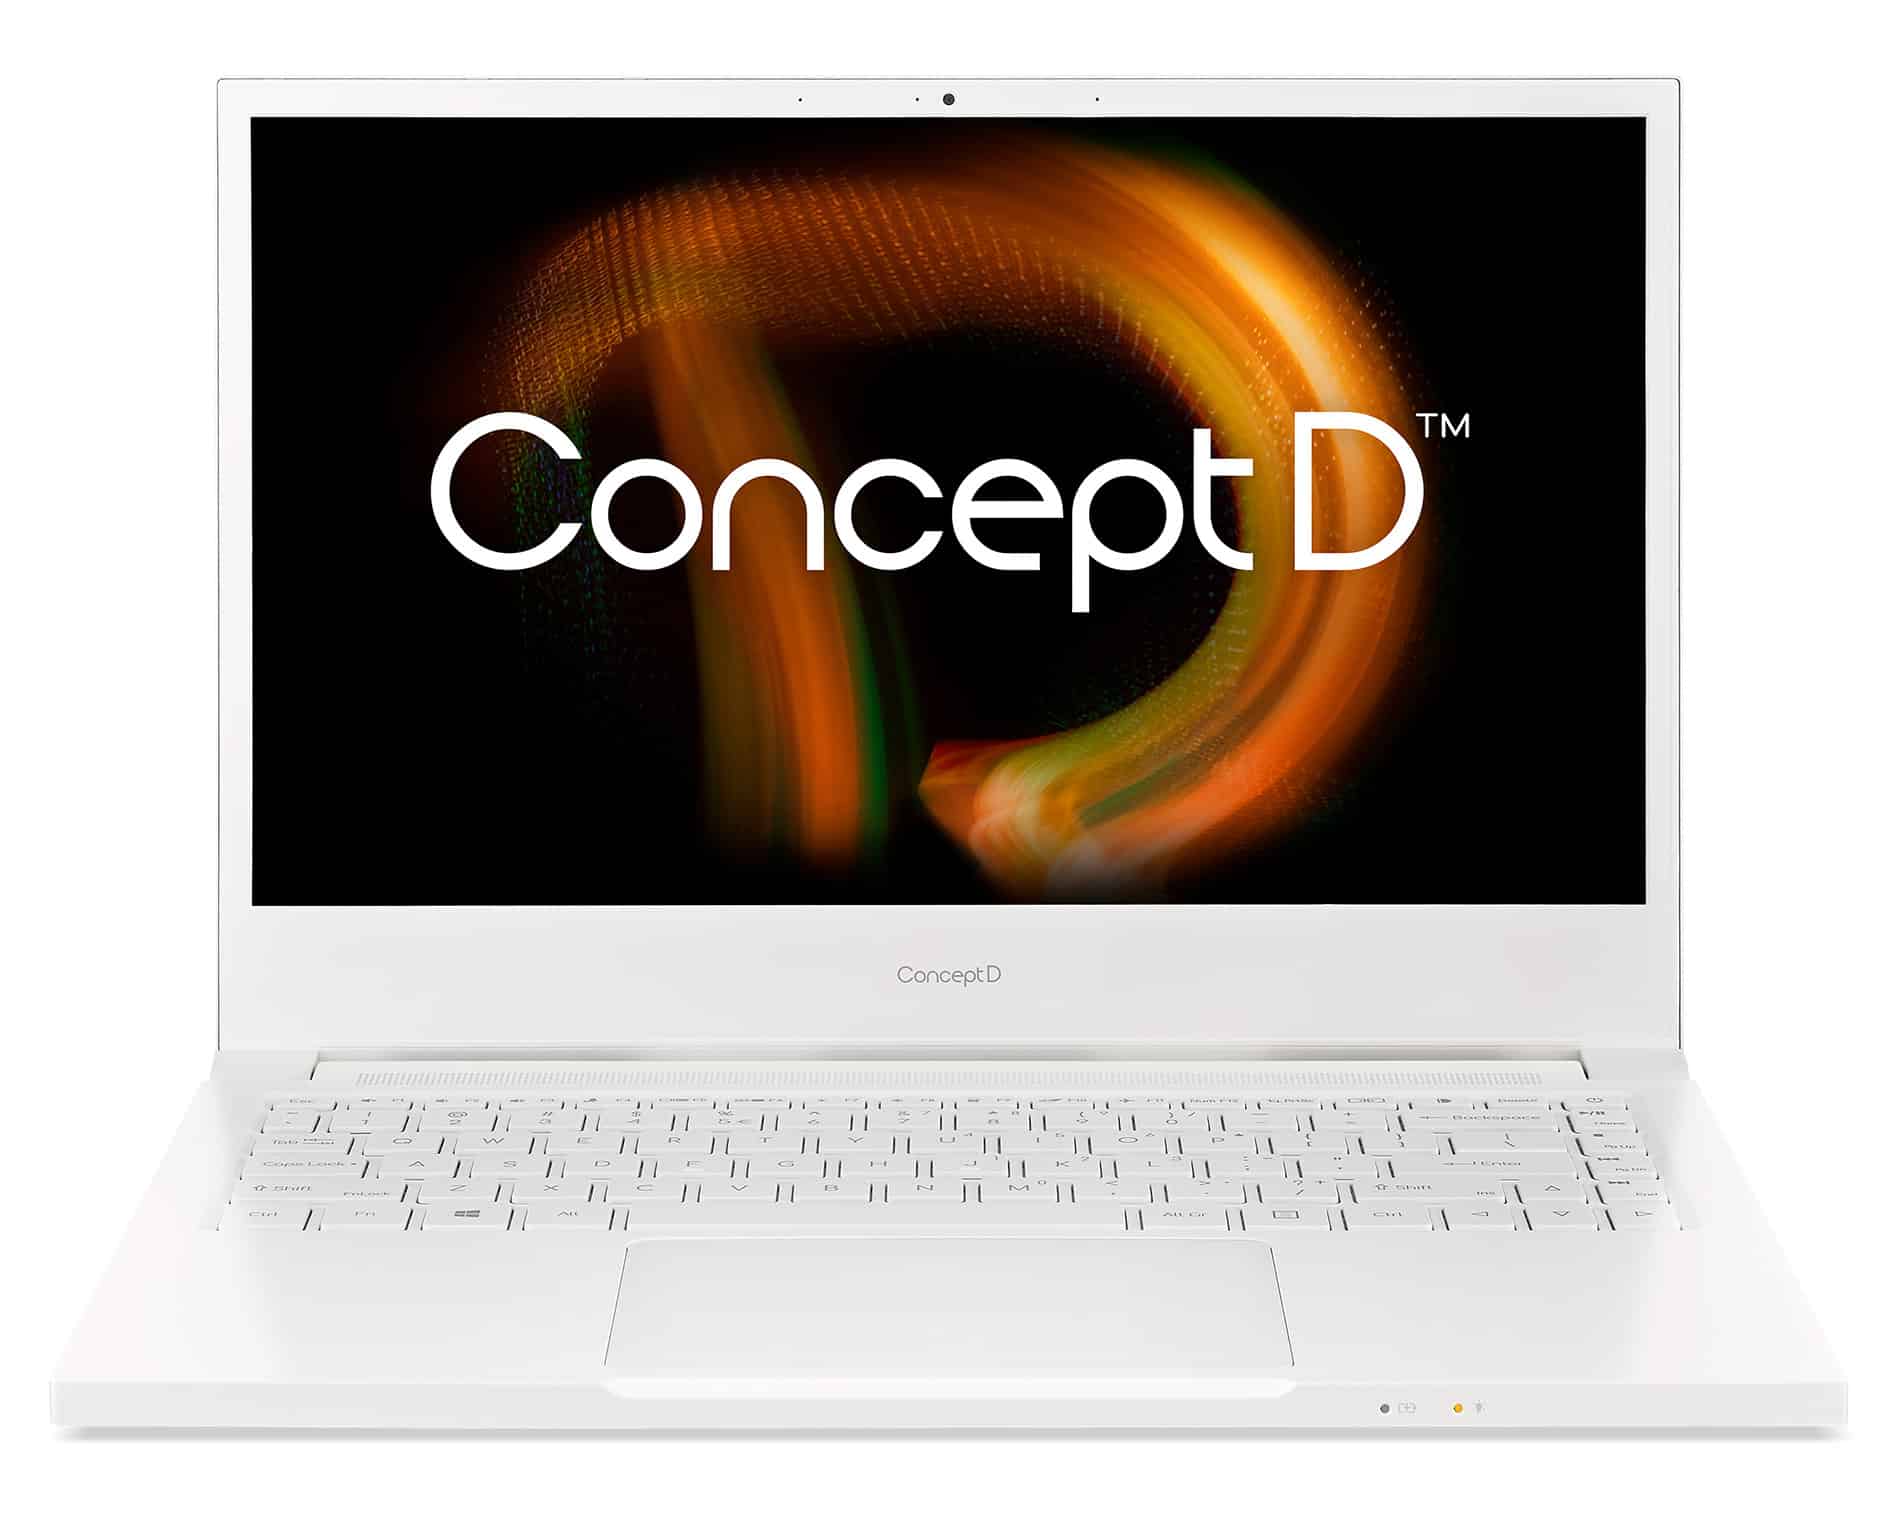 Acer ConceptD 3 Pro